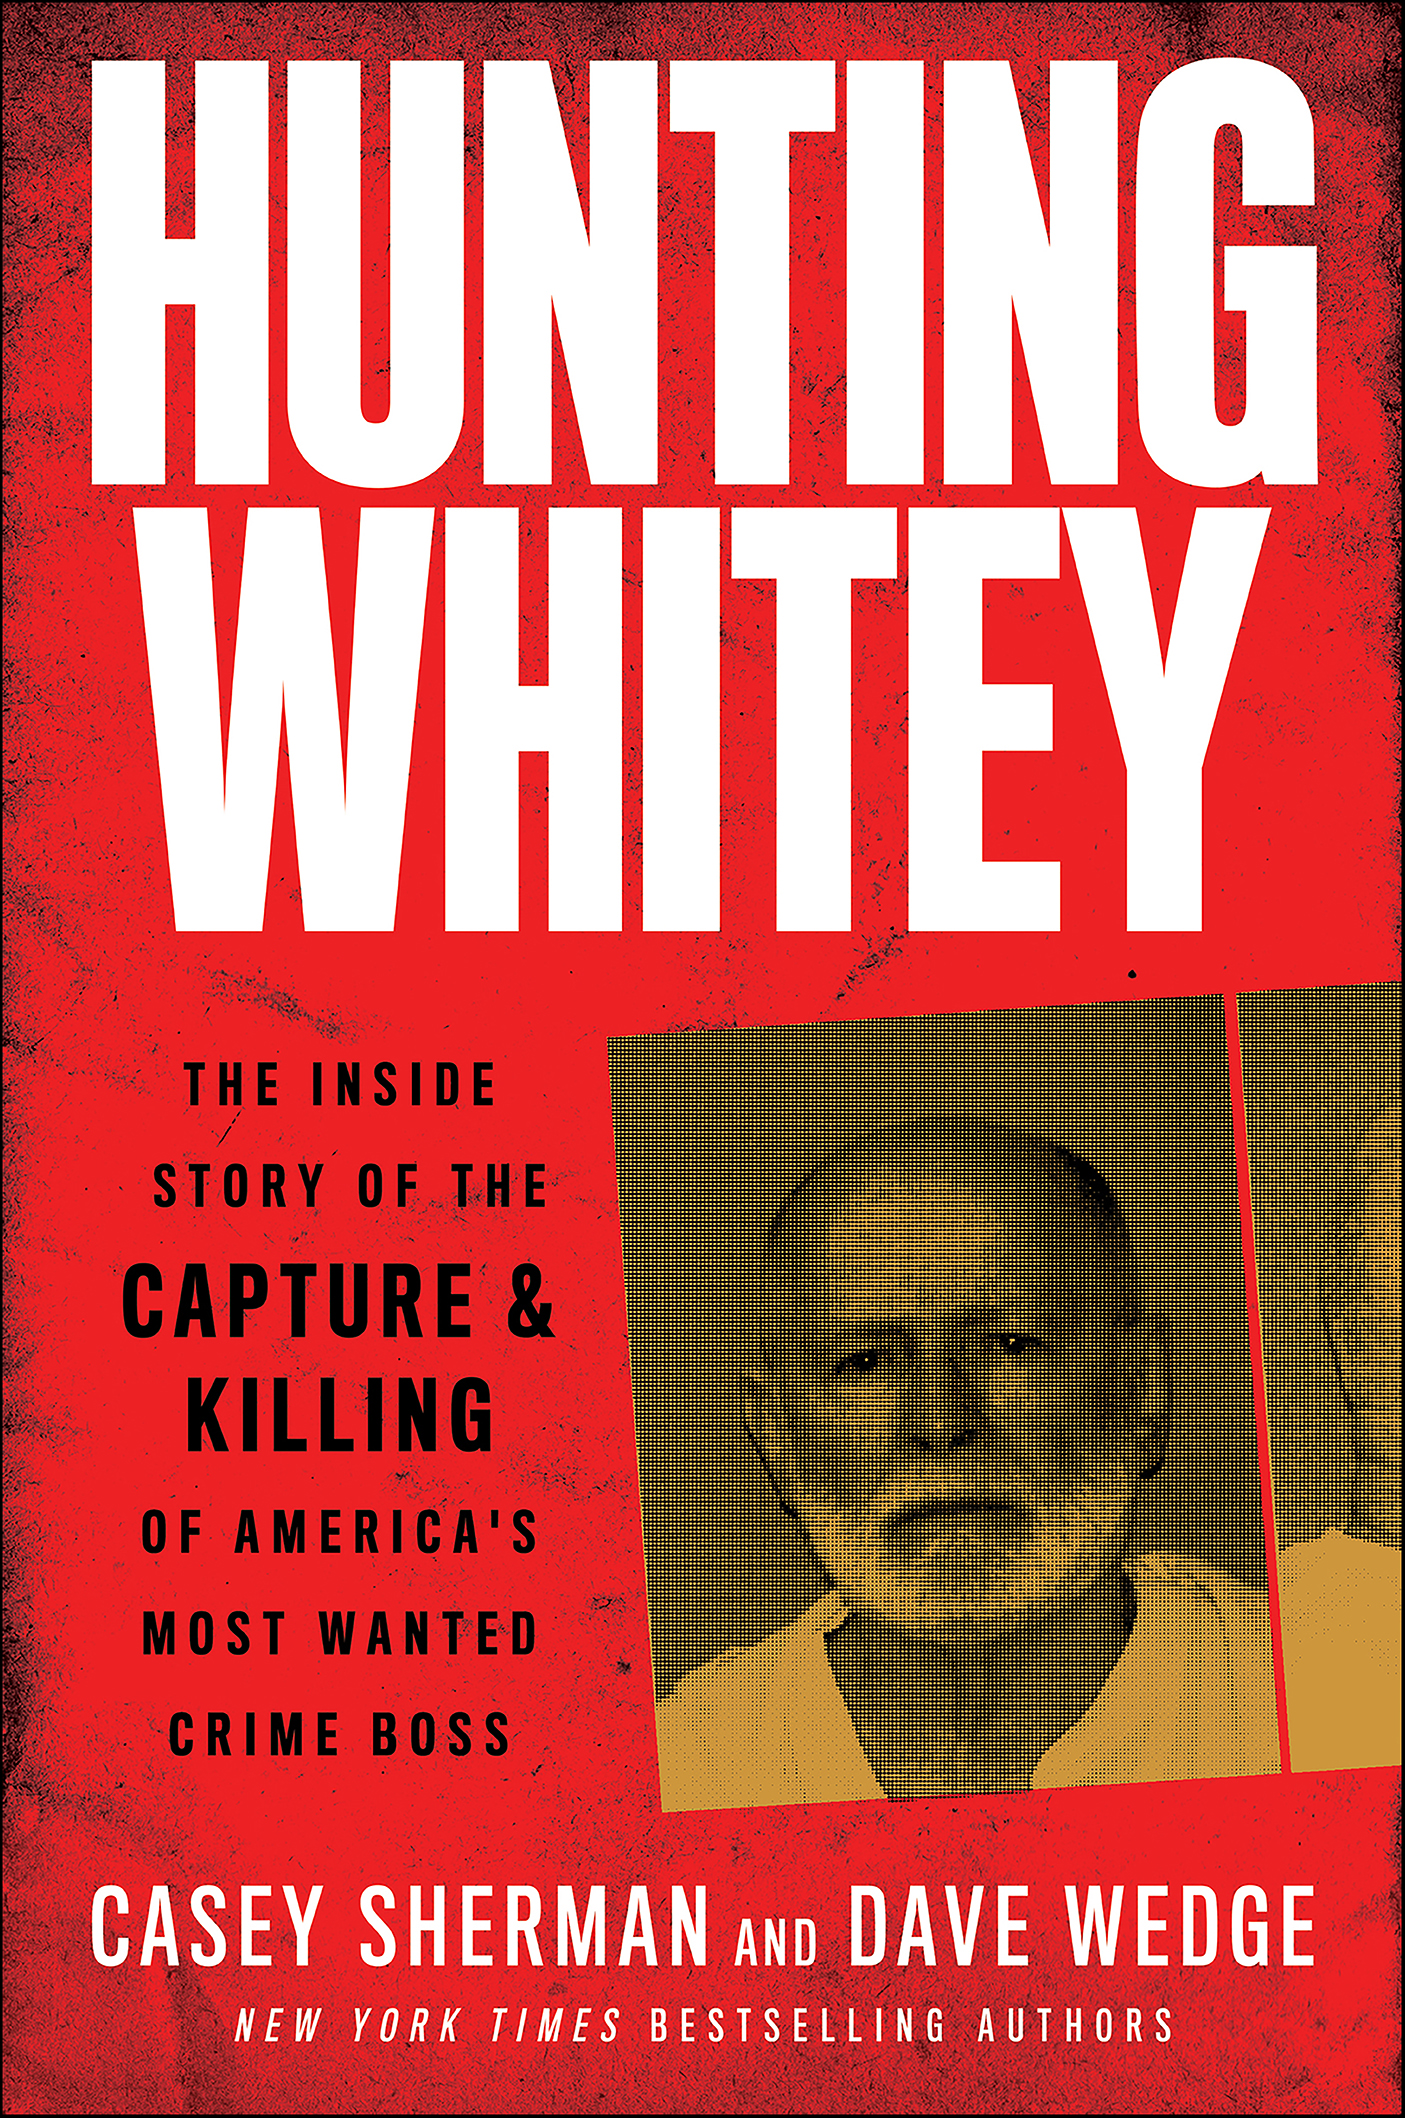 Hunting Whitey The Inside Story of the Capture & Killing of America's Most Wanted Crime Boss cover image